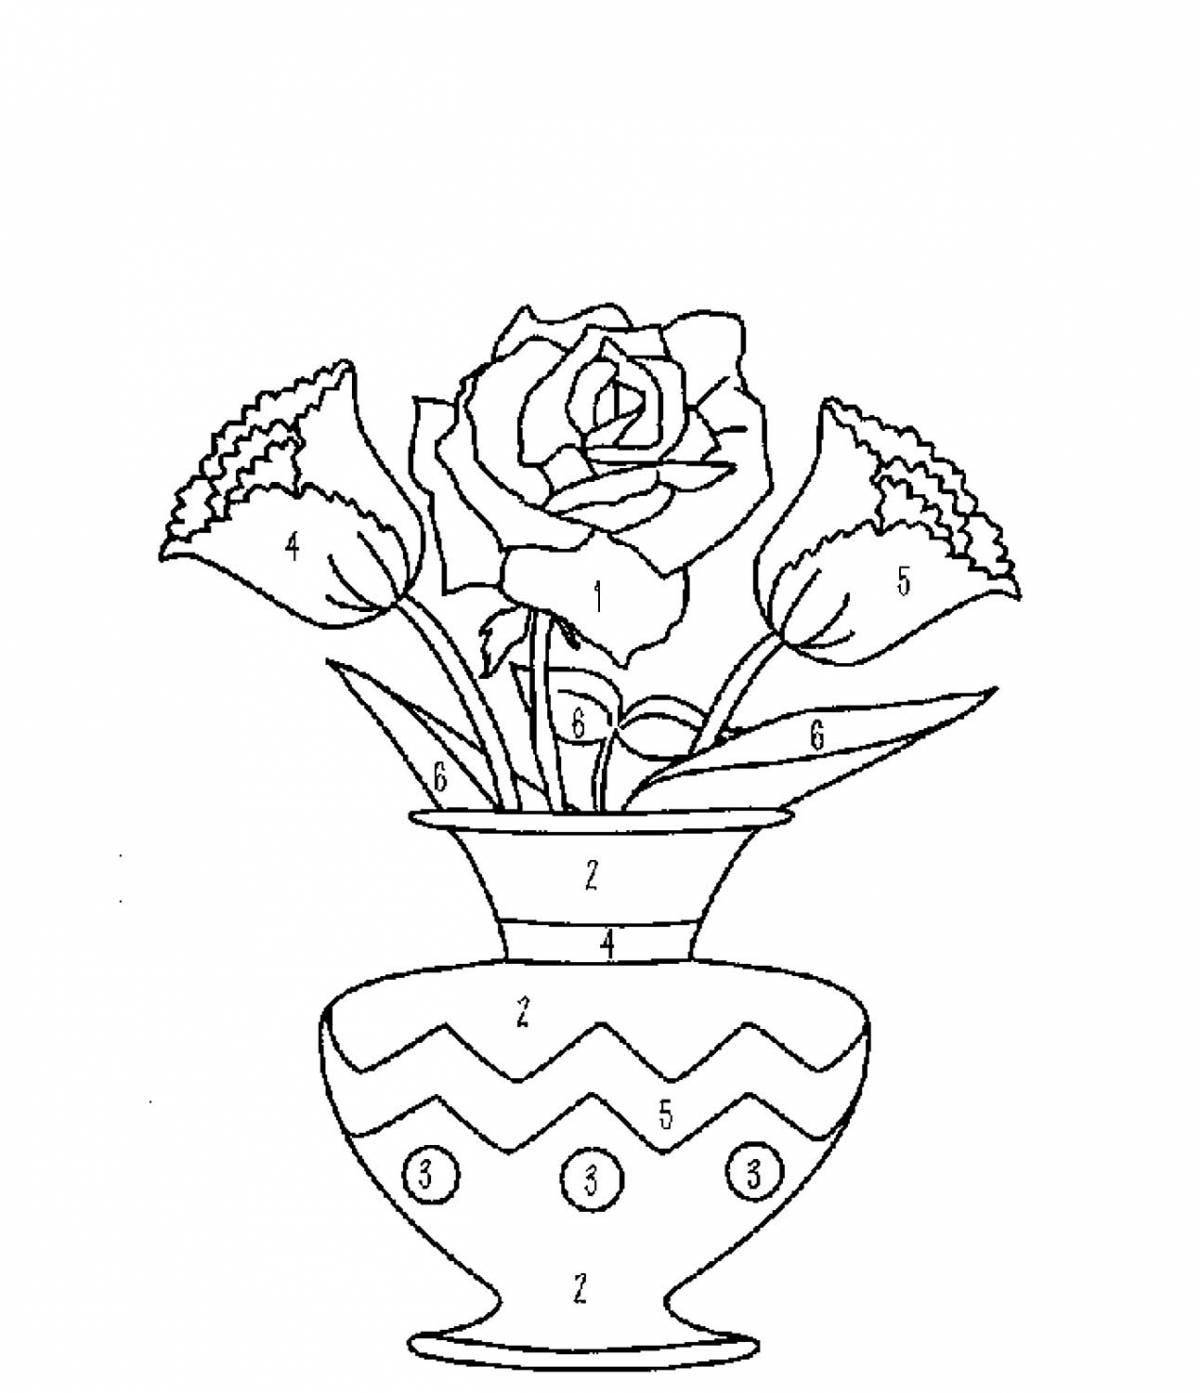 Luxury vase with flowers coloring book for children 5-6 years old